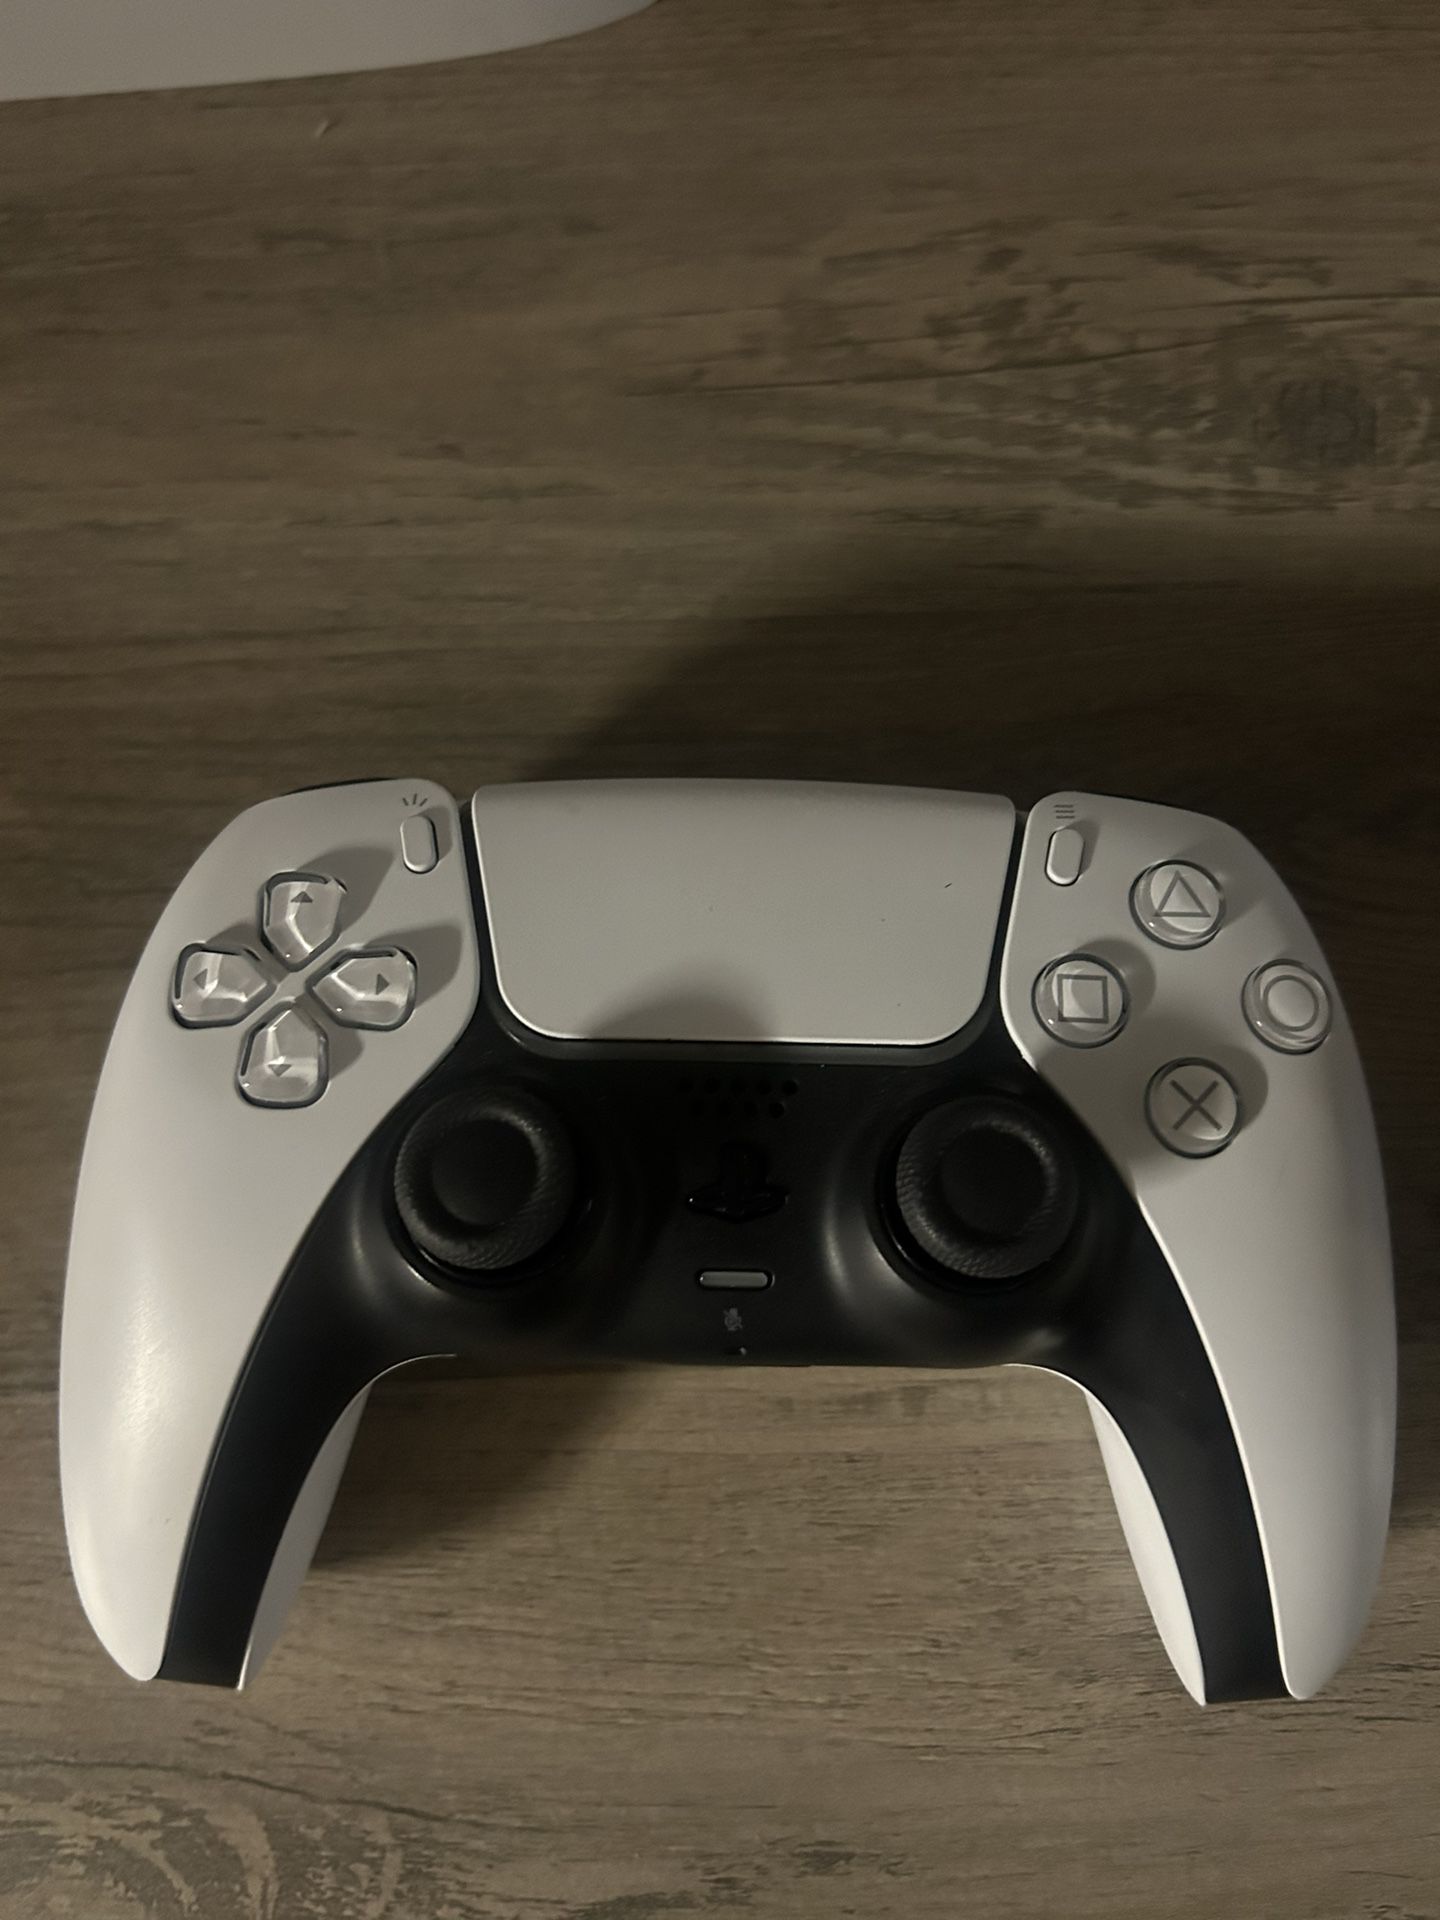 Ps5 Elite Headset And Controller